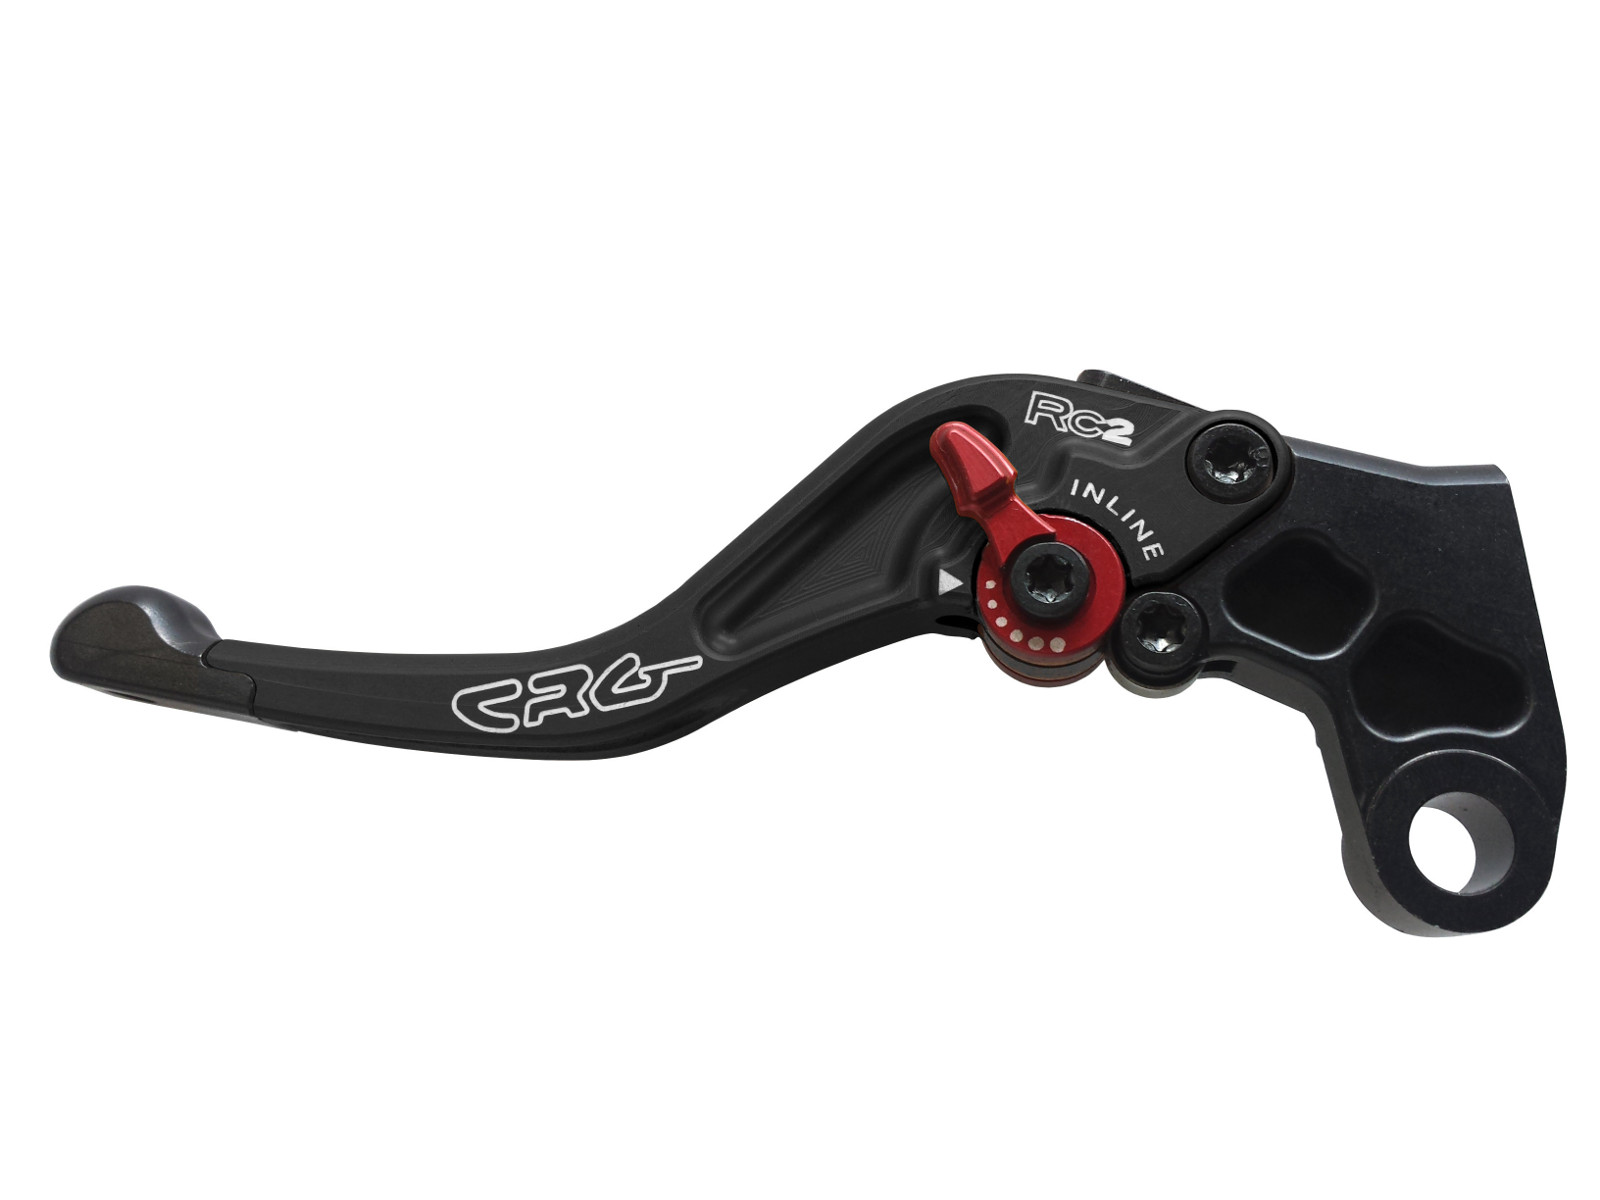 RC2 Shorty Black Adjustable Clutch Lever - For 10-14 BMW S1000RR - Click Image to Close